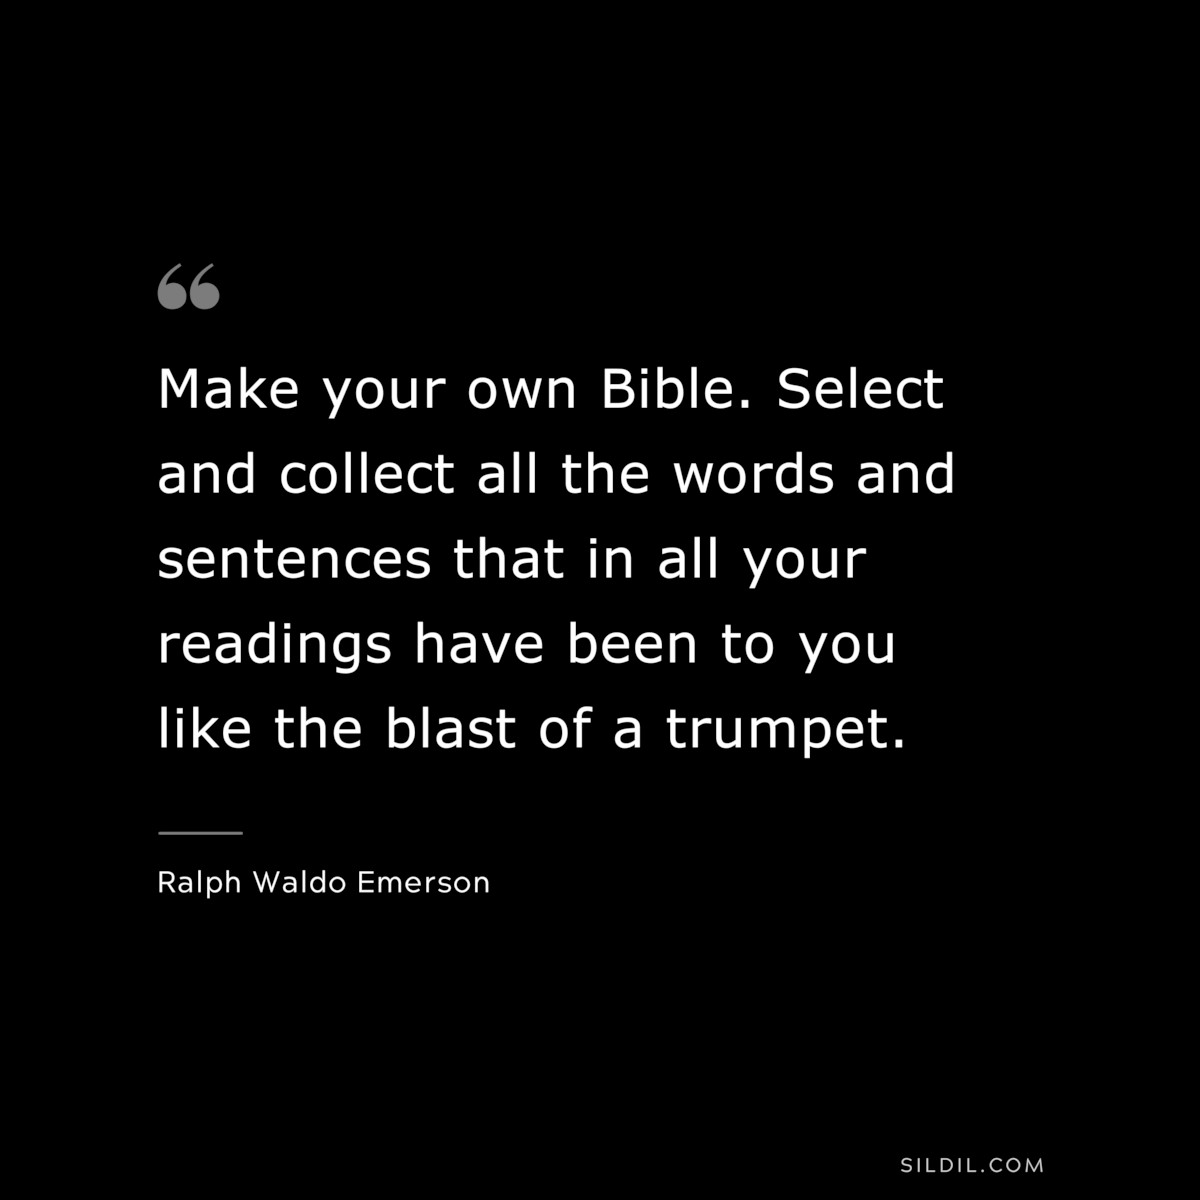 Make your own Bible. Select and collect all the words and sentences that in all your readings have been to you like the blast of a trumpet. — Ralph Waldo Emerson